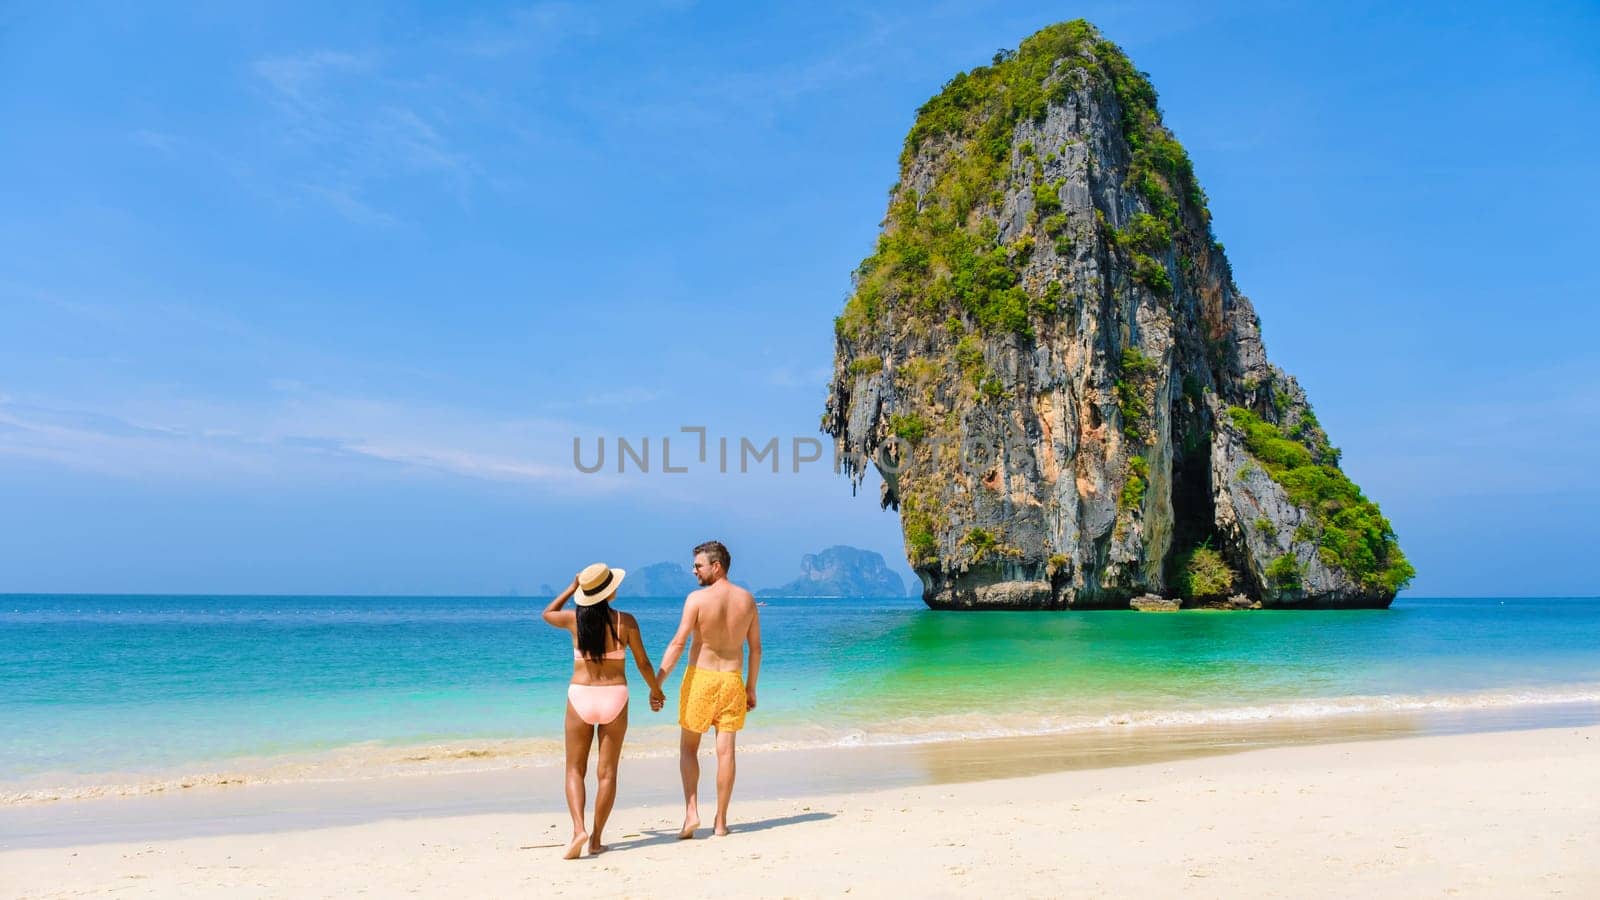 a diverse couple of men and women on the beach, an Asian woman in bikini and a caucasian man in swim short walking on the beach of Railay Beach in Thailand with limestone cliffs in the background